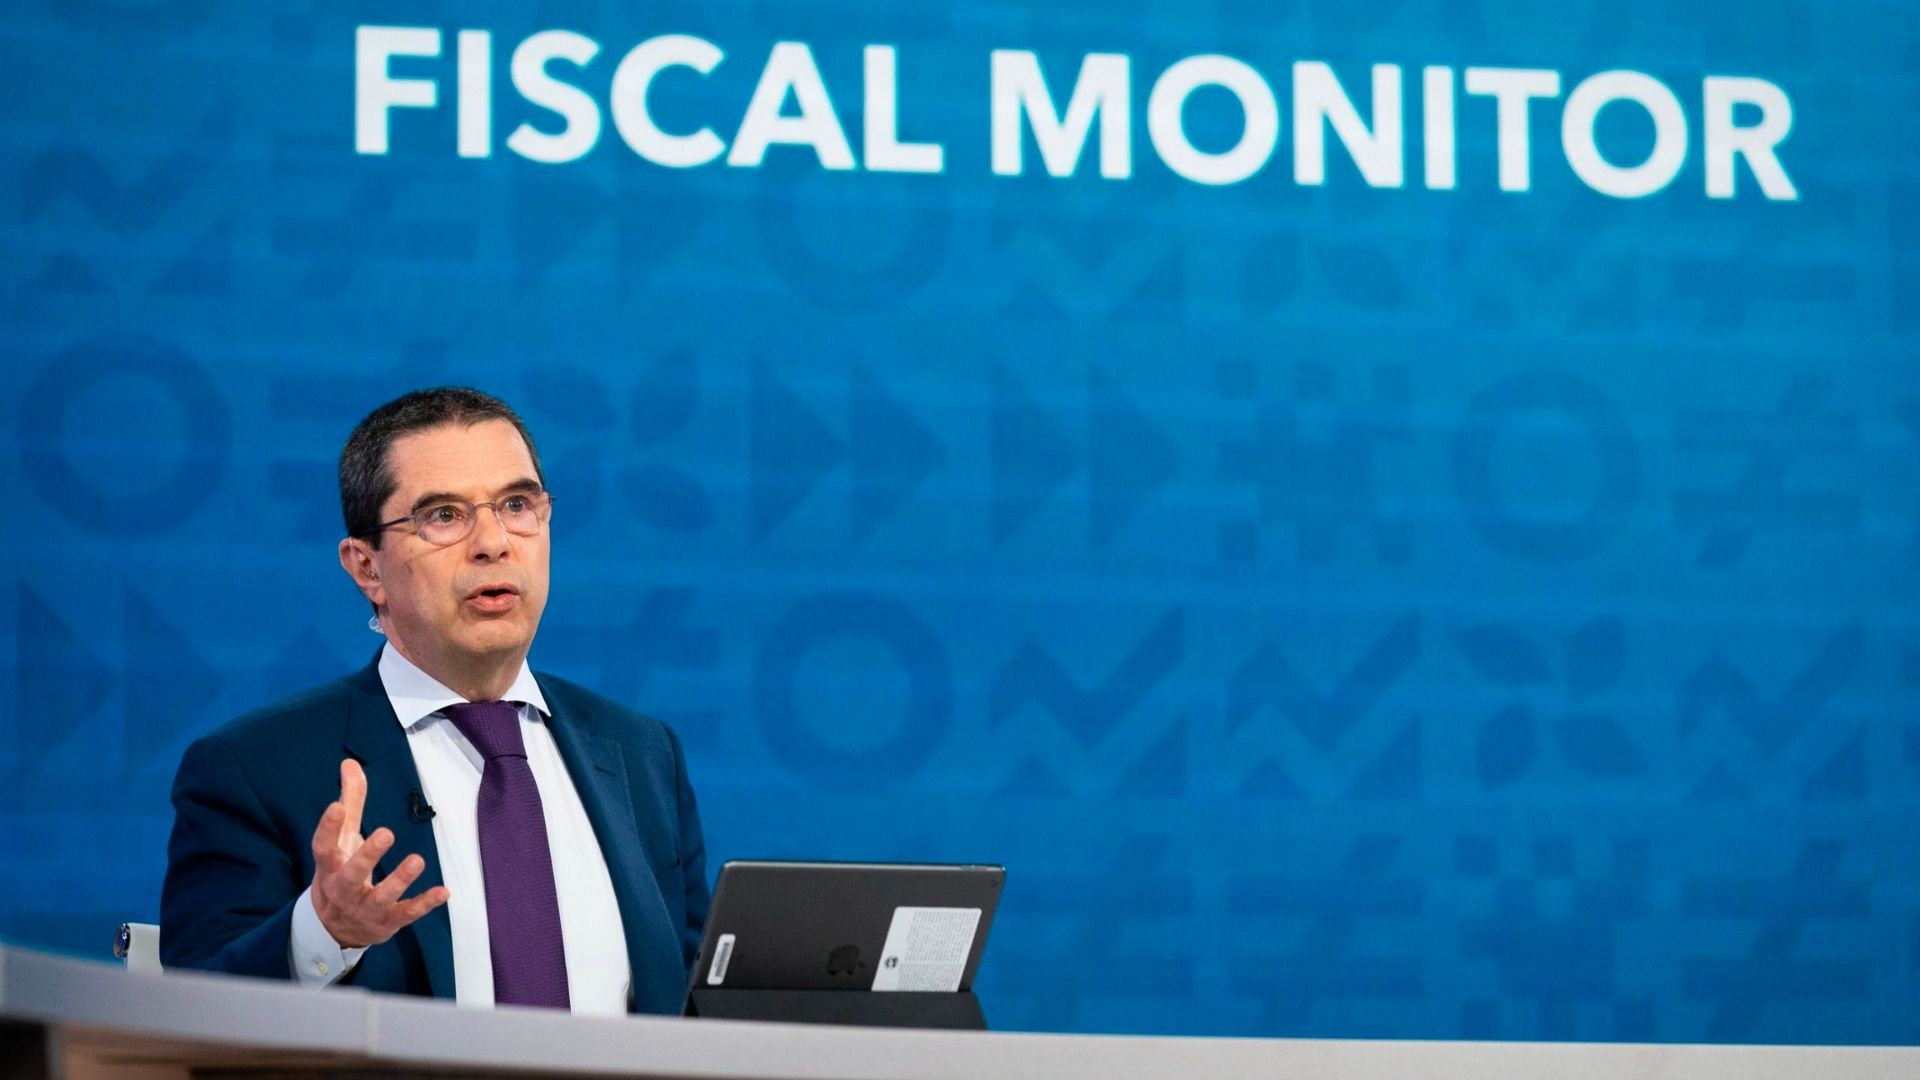 FISCAL MONITOR